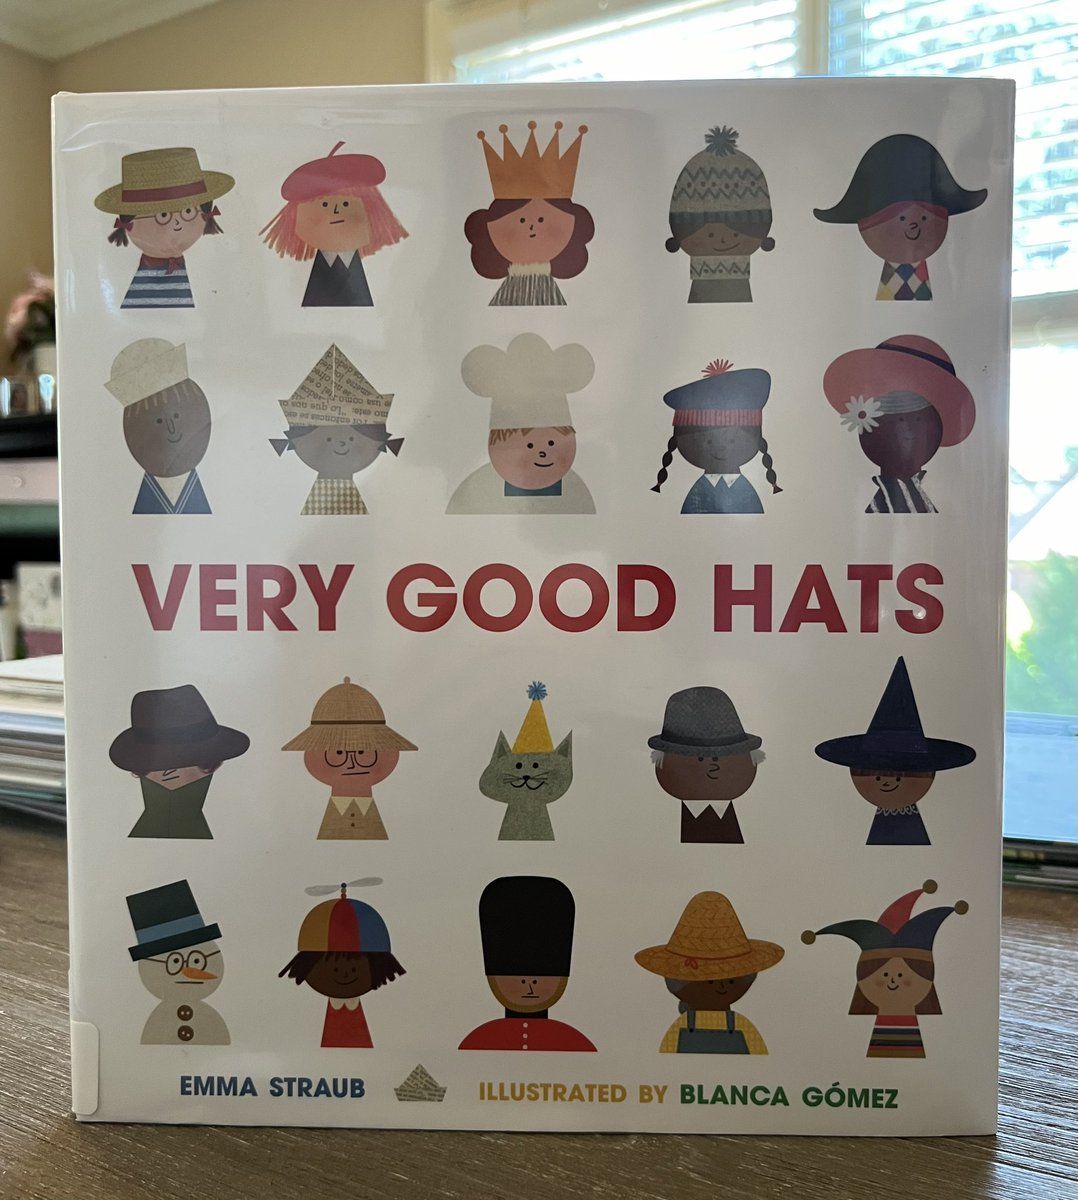 VERY GOOD HATS is a very good #picturebook by @emmastraub & #BlancaGomez that celebrates creativity, imagination & captures & honors and authentic childhood sense of play & wonder. I love it a lot!❤️👒🧢🌰🥣🎉

❤️📚💕@penguinkids @PenguinClass